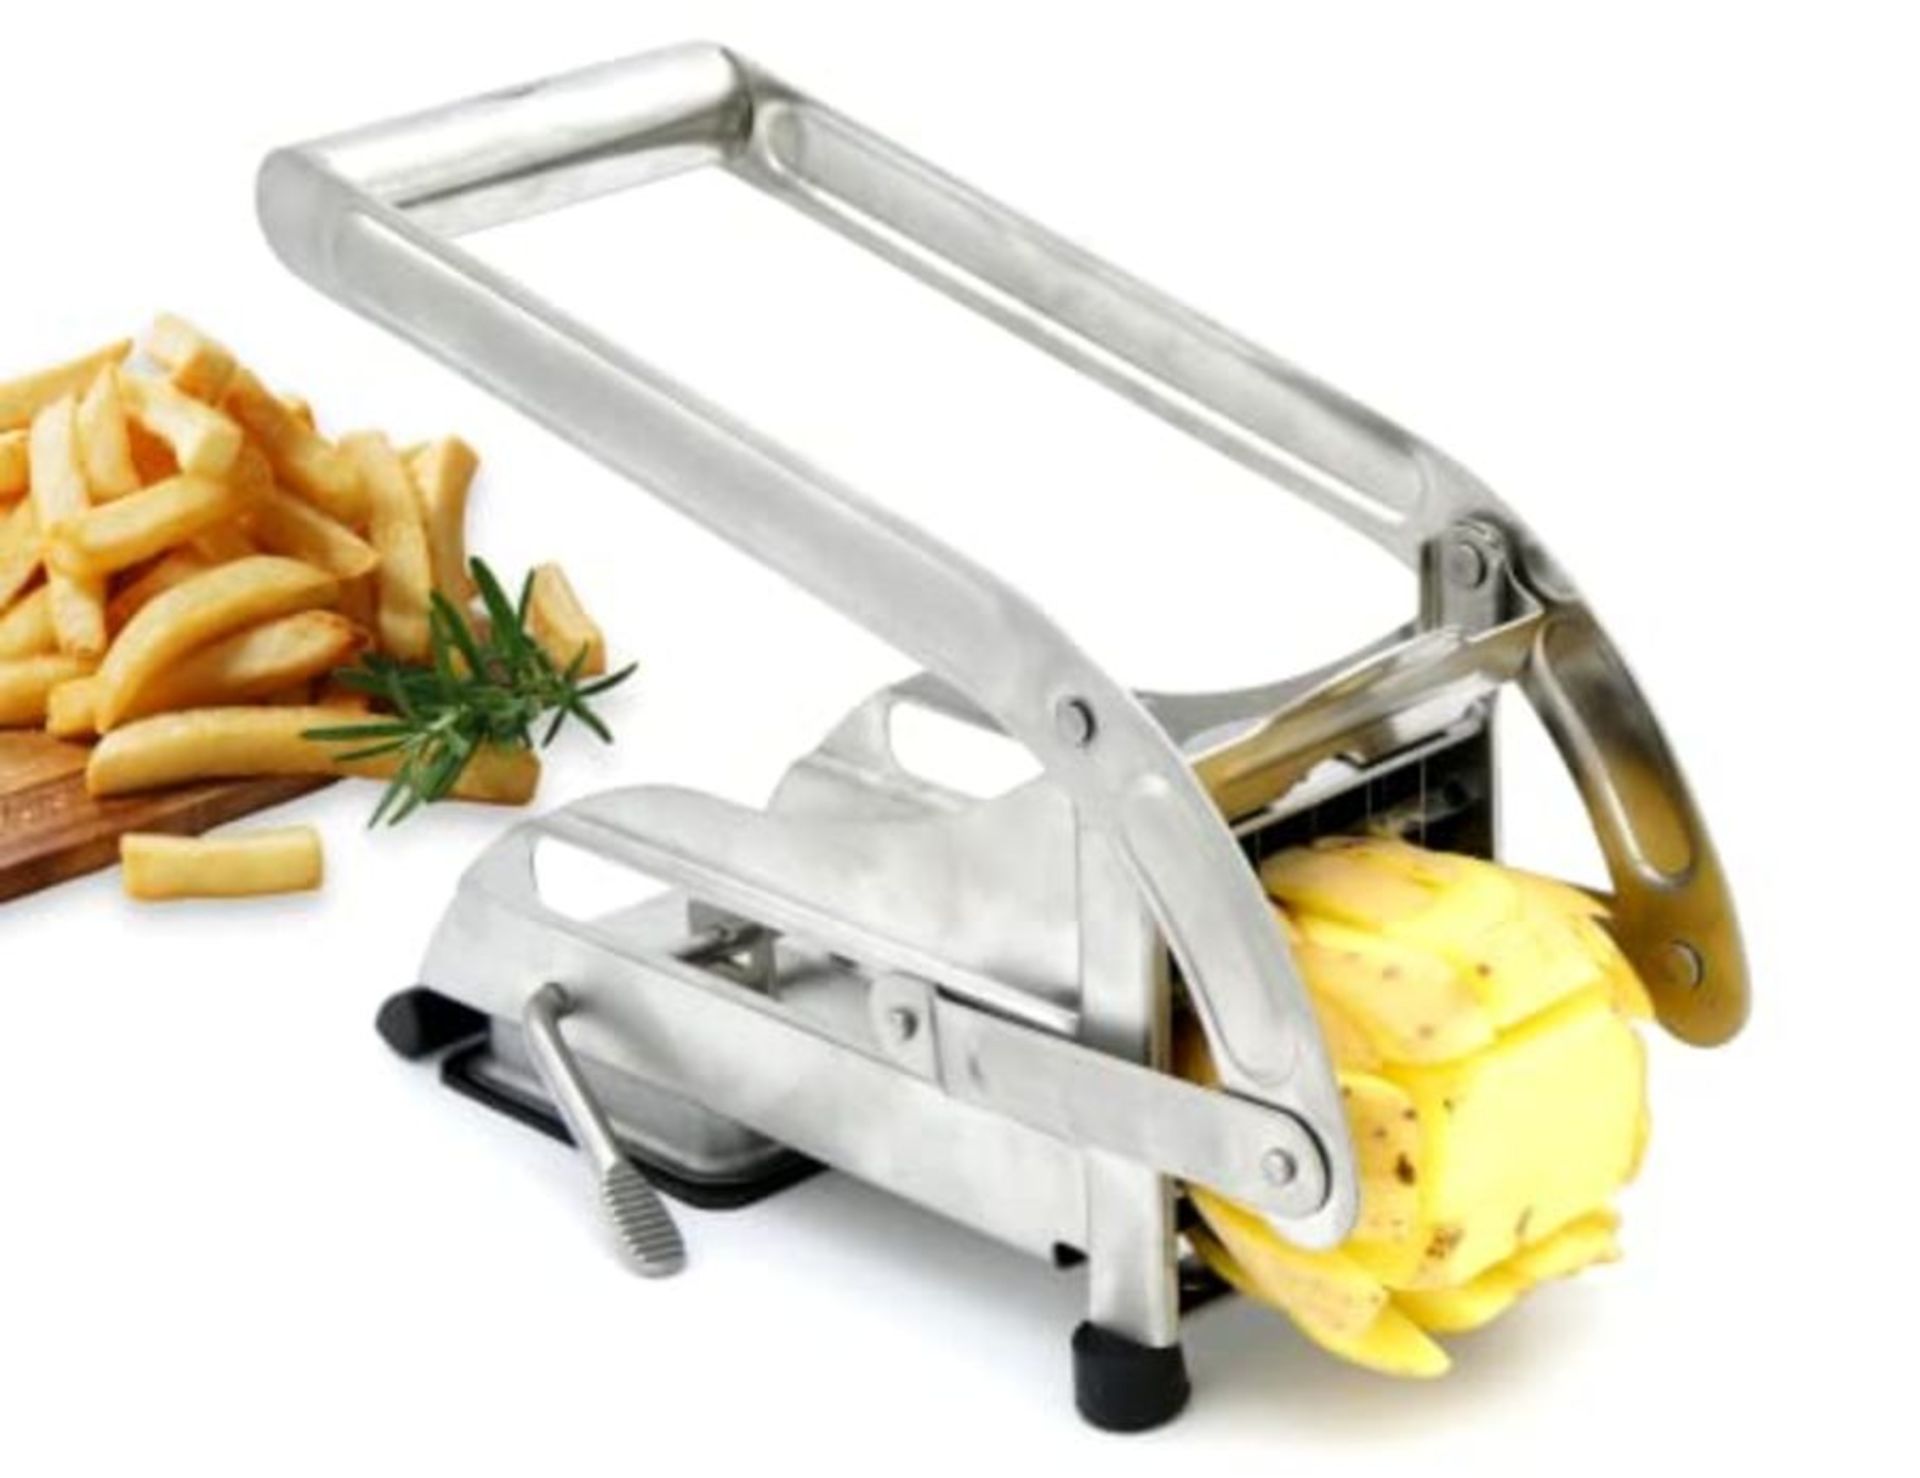 Impeccable Culinary Objects (ICO) Potato Chipper And French Fry Cutter Includes Two St